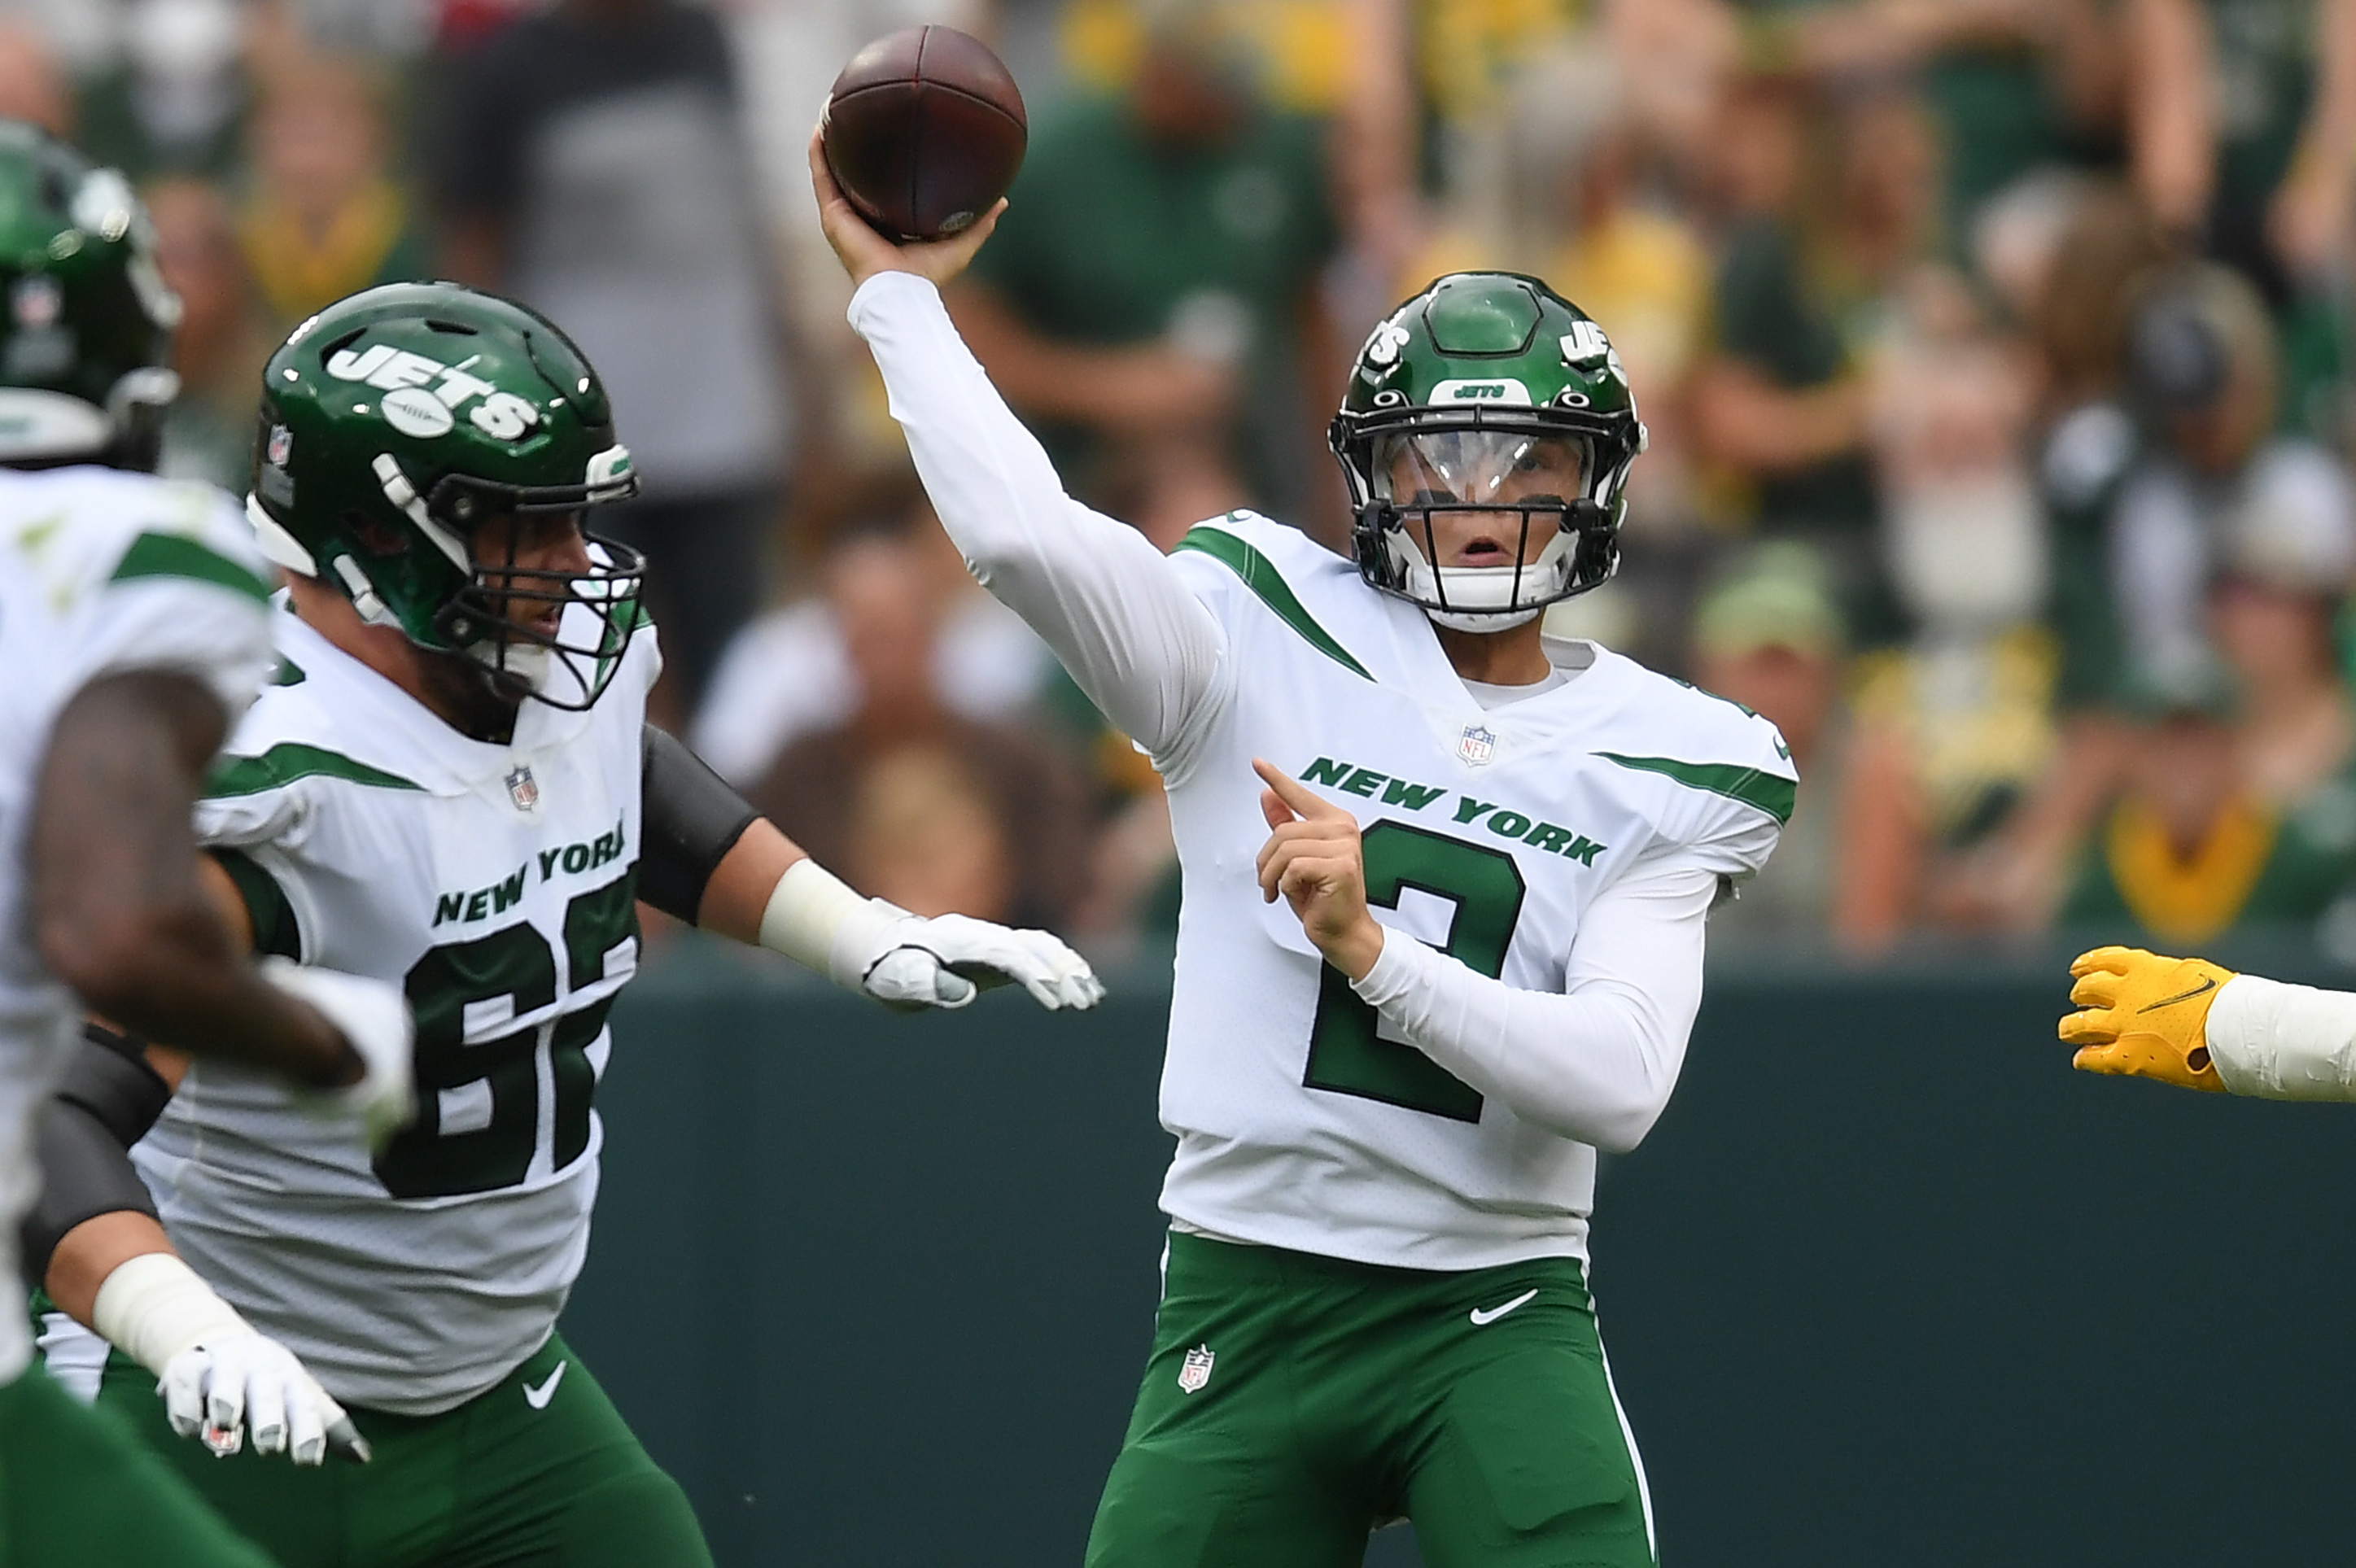 Preseason Week 2 Takeaways: There's No Ceiling for Jets' QB Zach